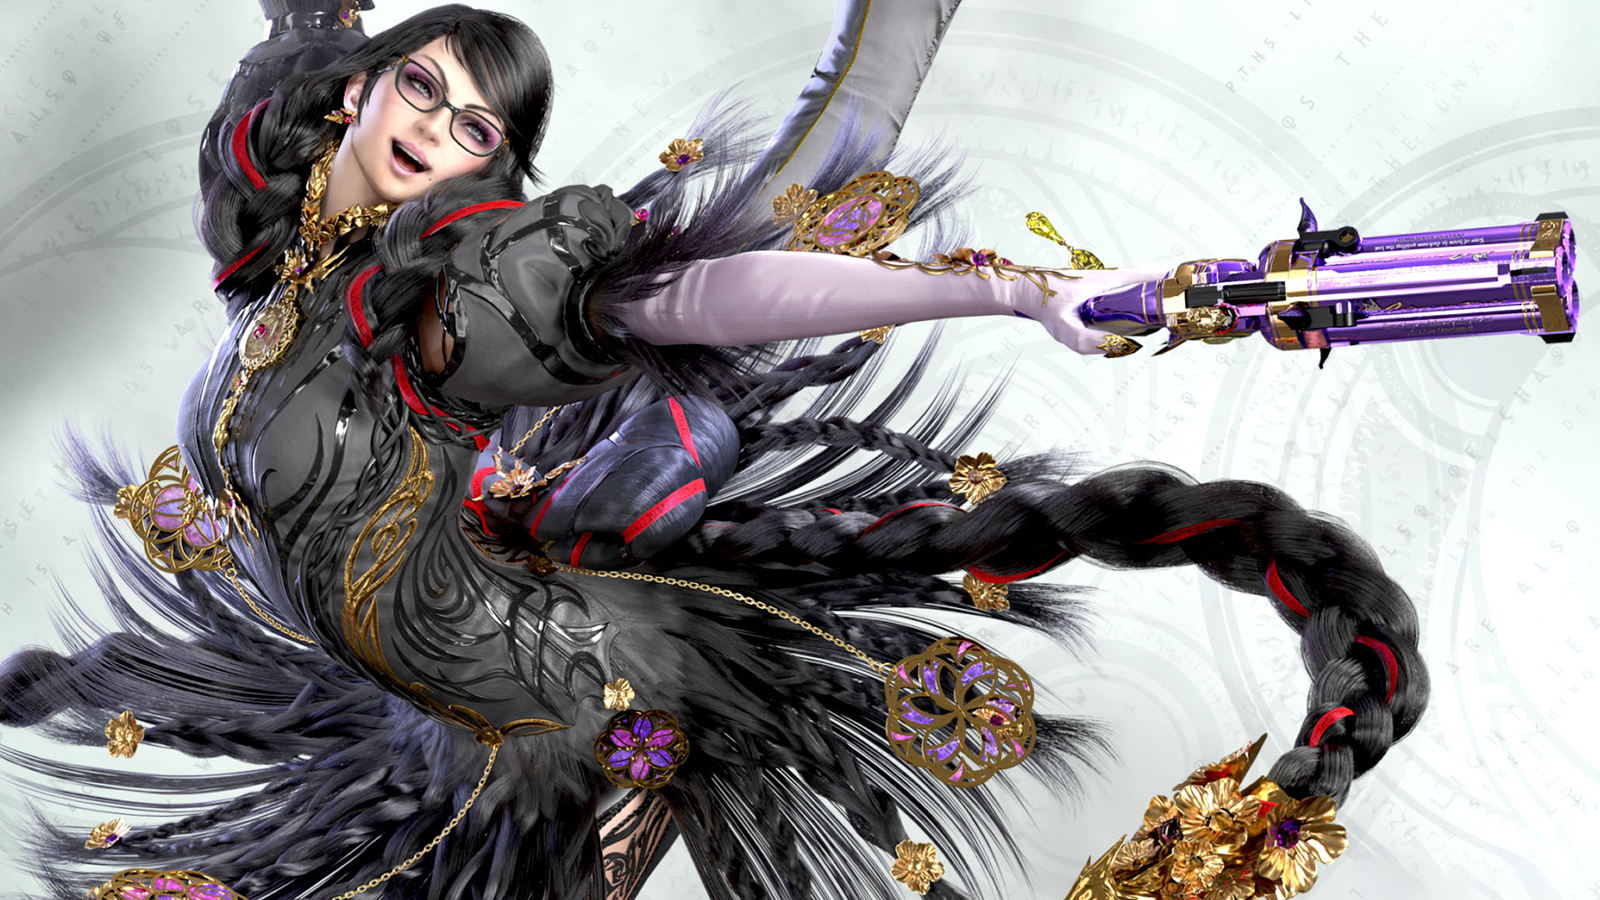 Bayonetta 3 is a great game marred by polish and performance